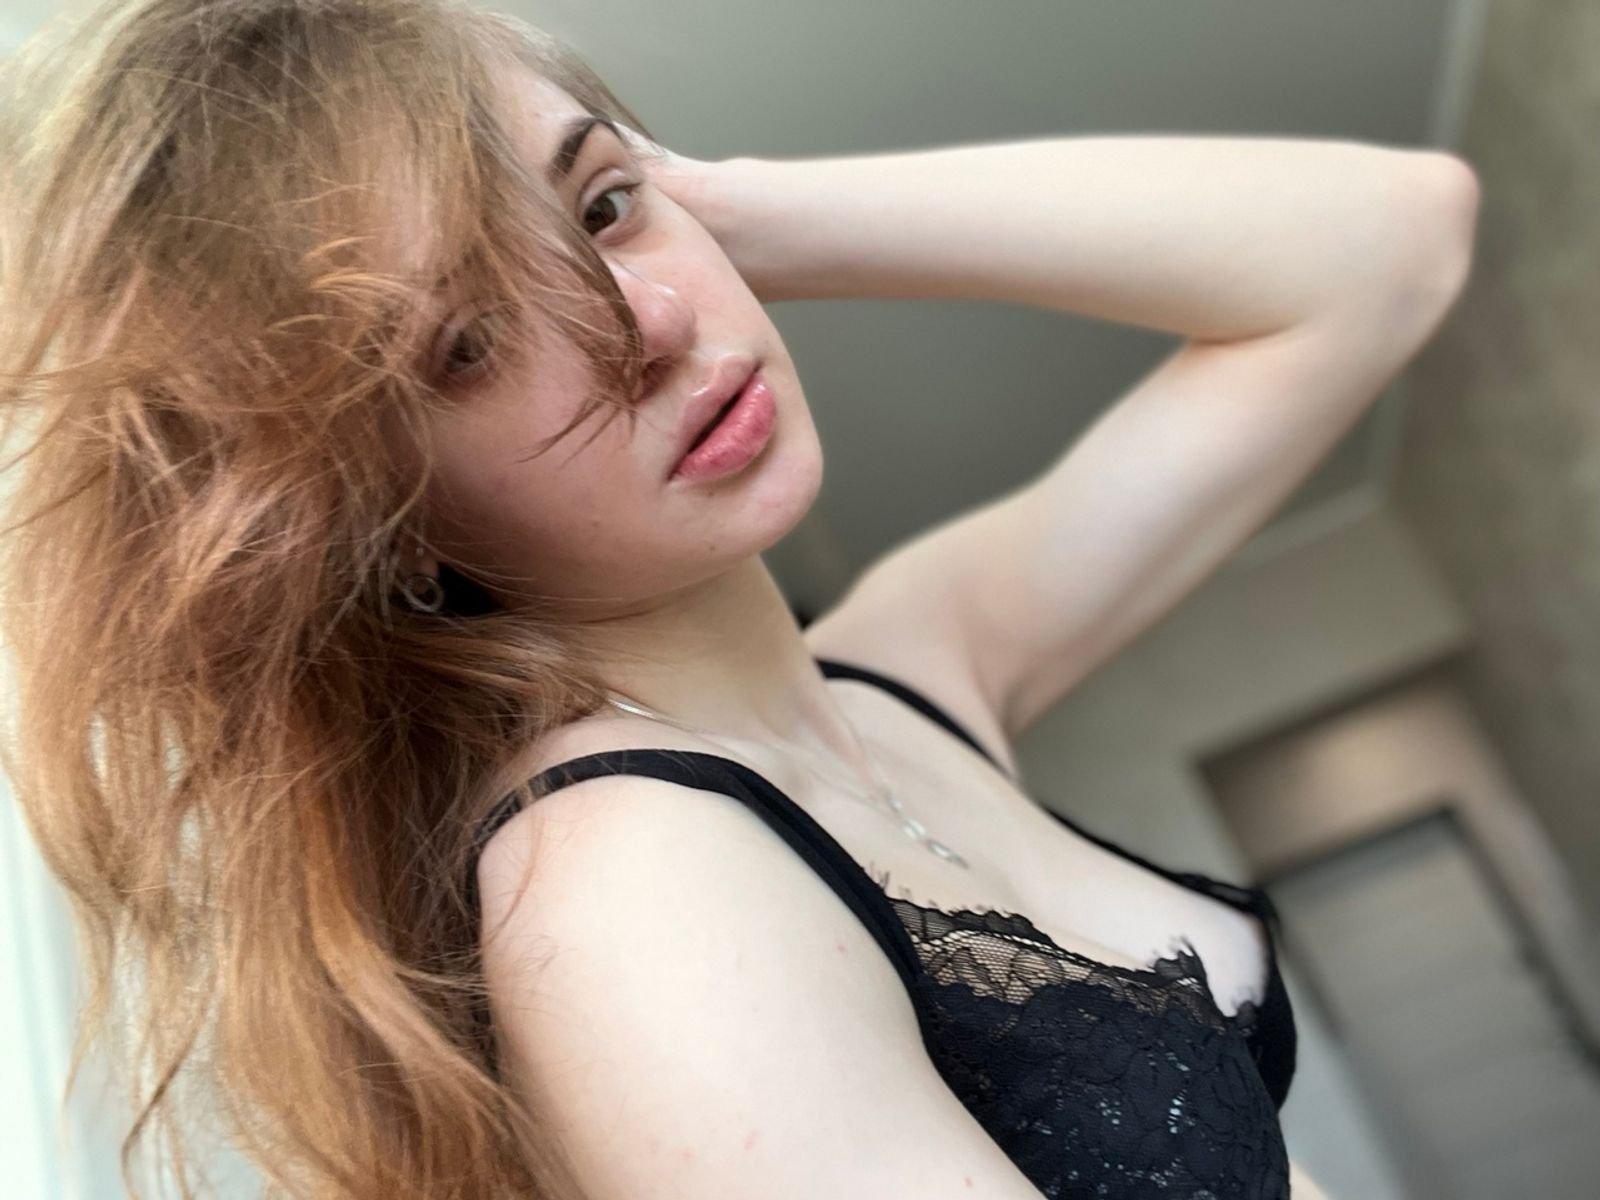 Skype live sex chat with Sweet Lilya